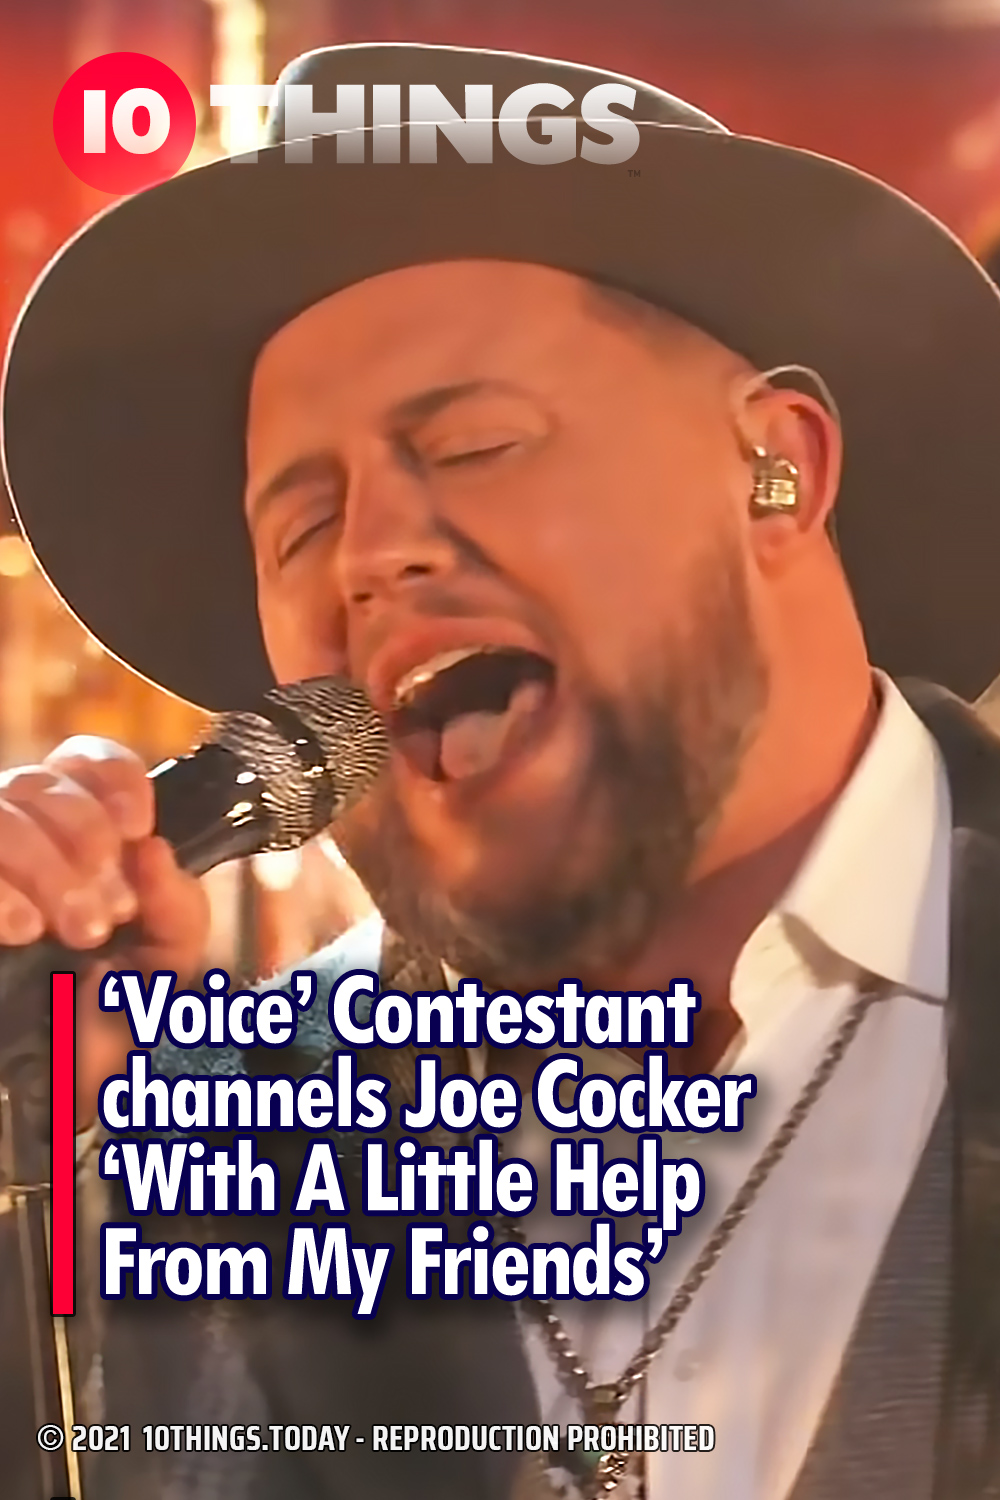 ‘Voice’ Contestant channels Joe Cocker ‘With A Little Help From My Friends’